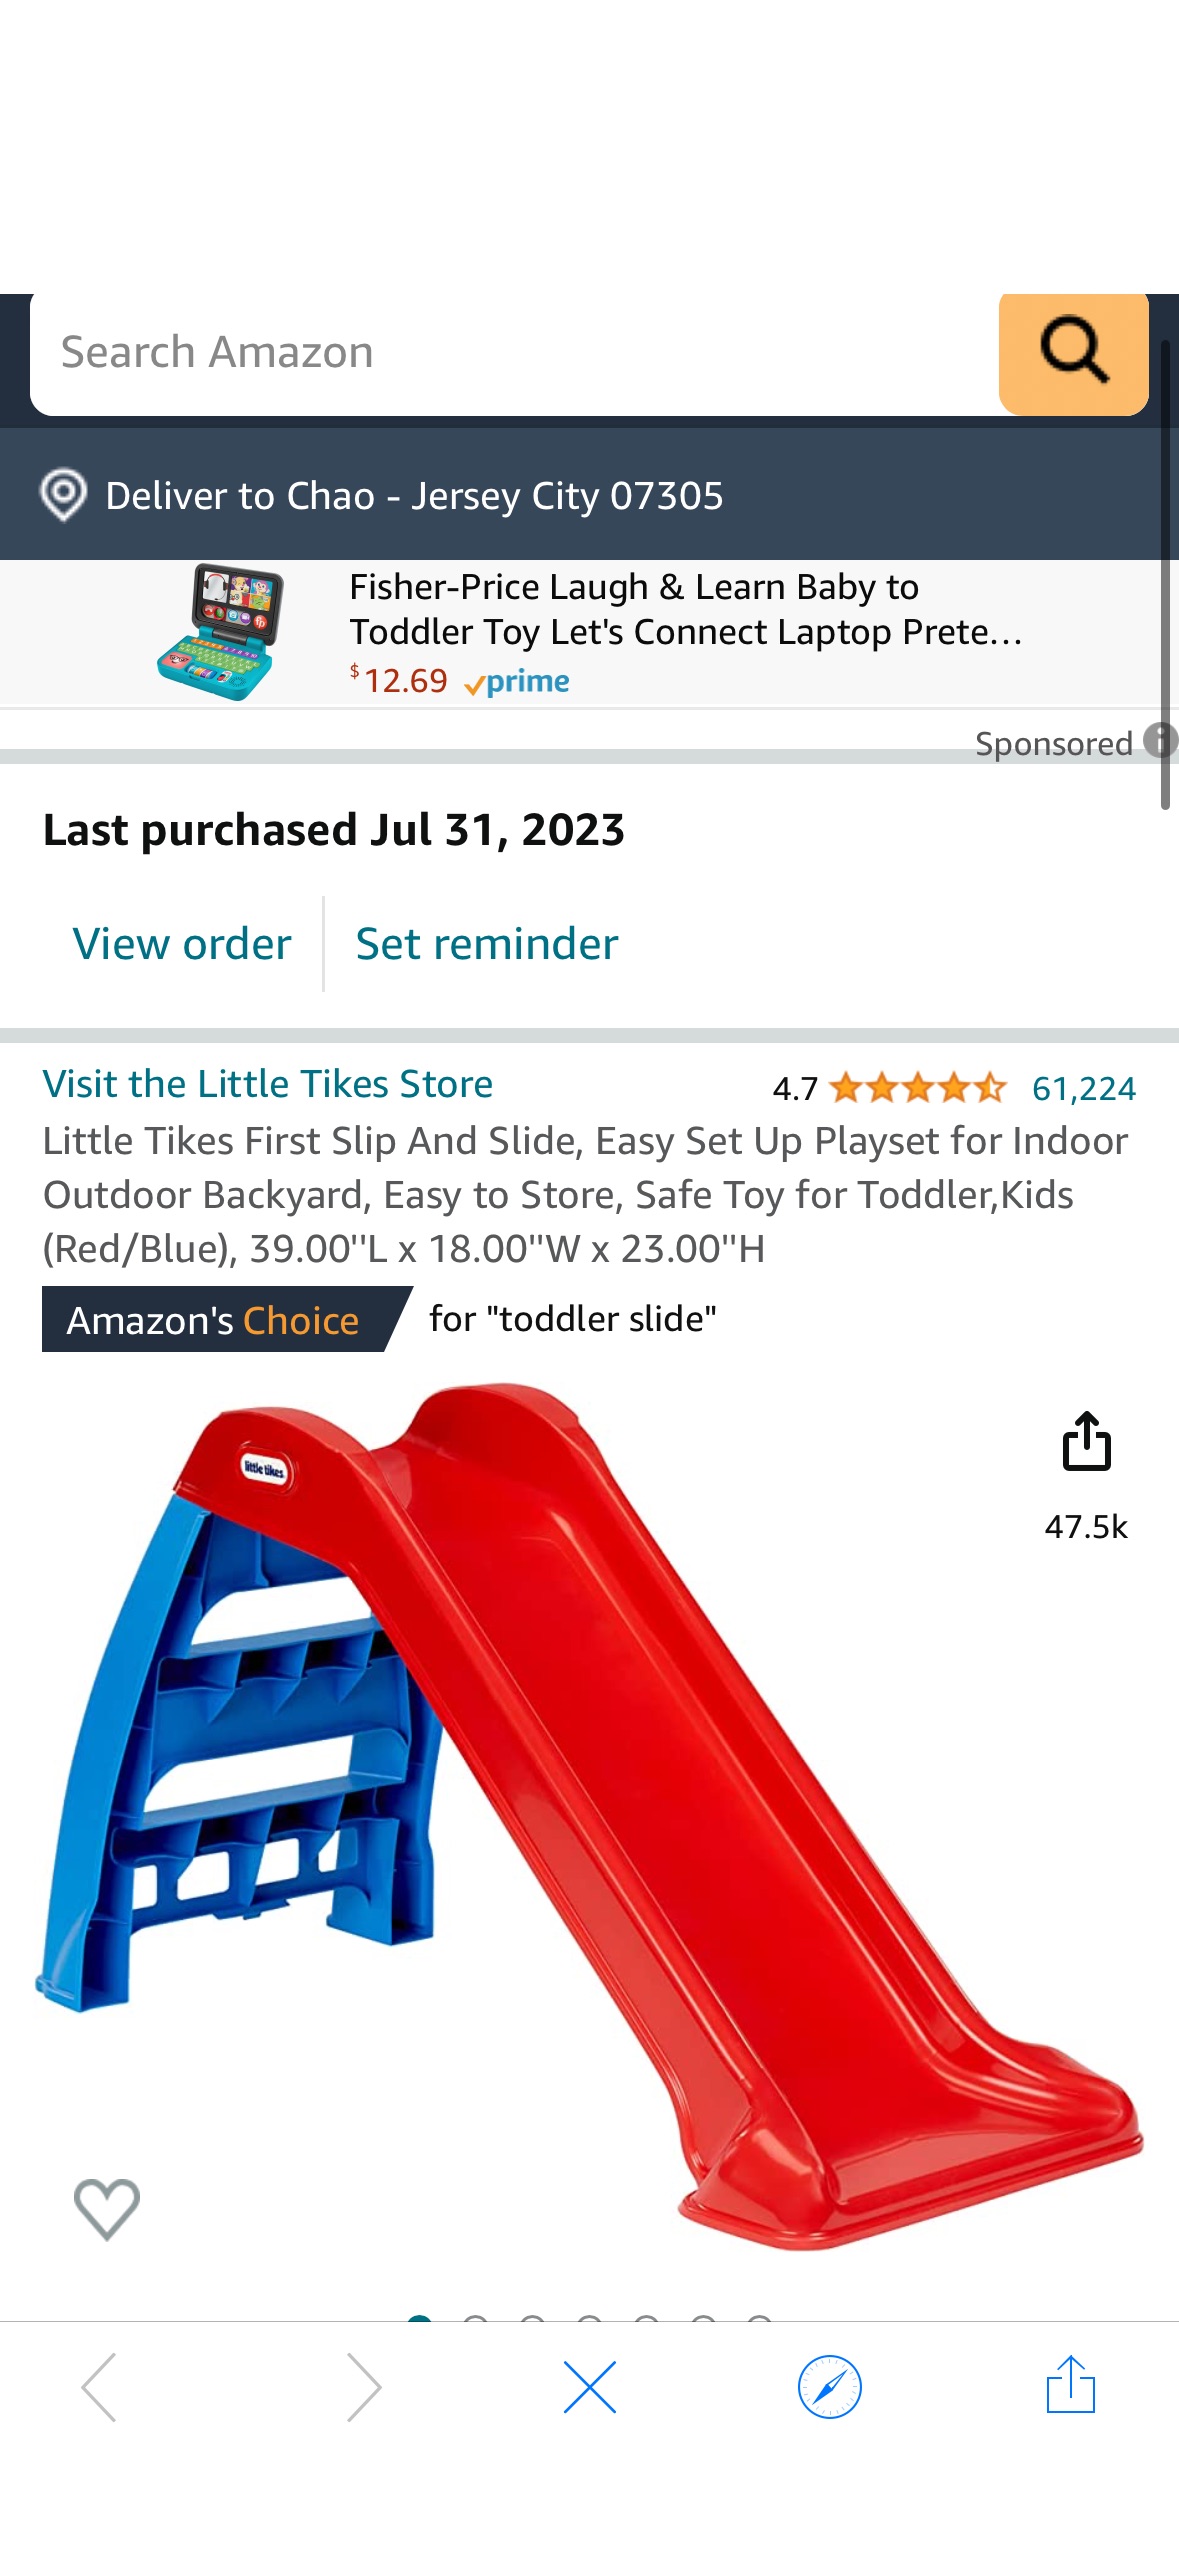 Amazon.com: Little Tikes First Slip And Slide, Easy Set Up Playset for Indoor Outdoor Backyard, Easy to Store, Safe Toy for Toddler,Kids (Red/Blue), 39.00''L x 18.00''W x 23.00''H : Toys & Games